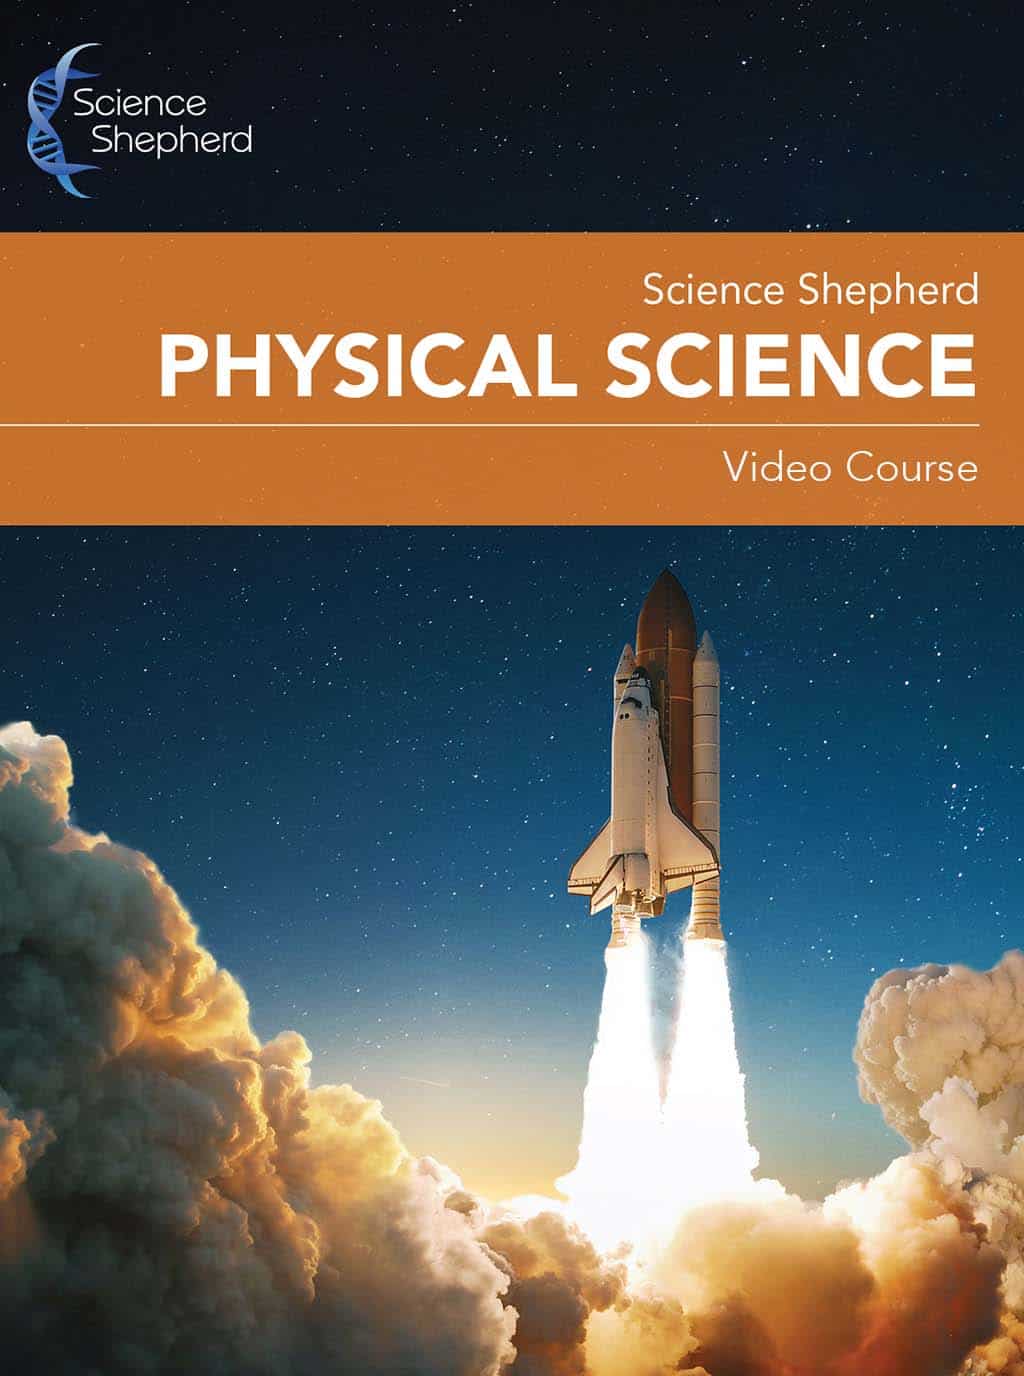 Homeschool Physical Science curriculum video course cover of a shuttle launch at twilight